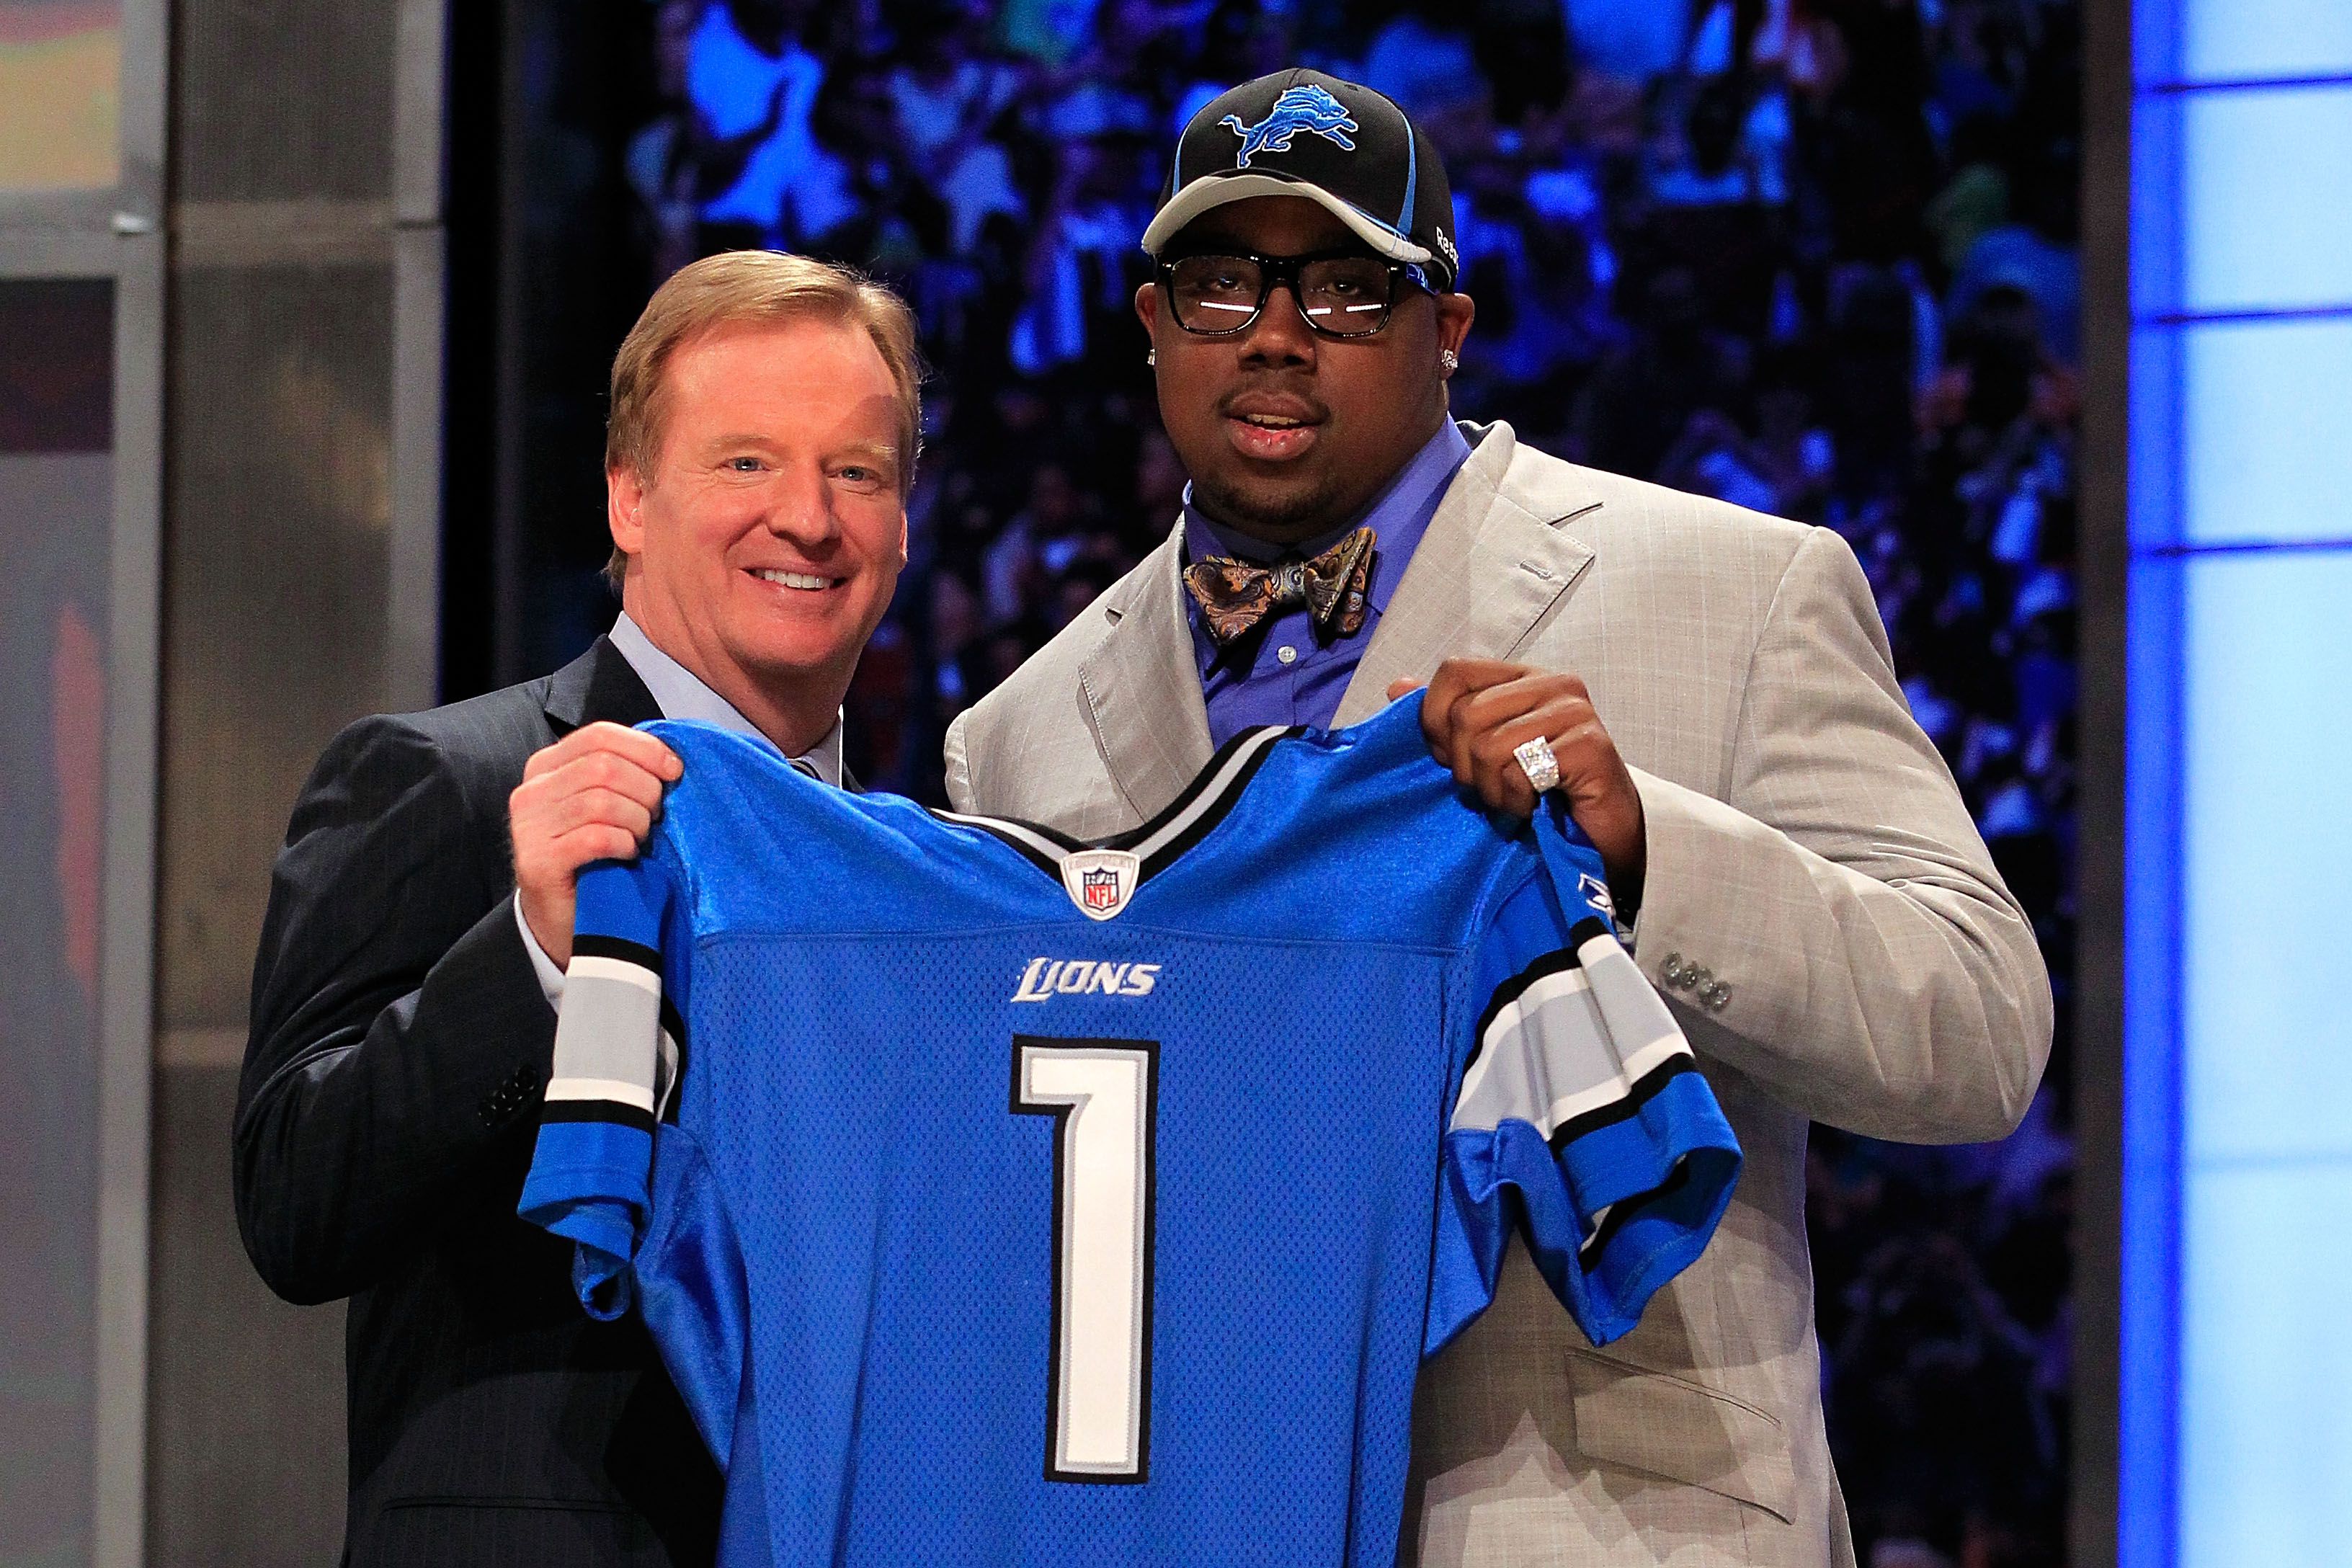 NEW YORK, NY - APRIL 28:  NFL Commissioner Roger Goodell poses for a photo with Nick Fairley, #13 overall pick by the Detriot Lions, during the 2011 NFL Draft at Radio City Music Hall on April 28, 2011 in New York City.  (Photo by Chris Trotman/Getty Imag